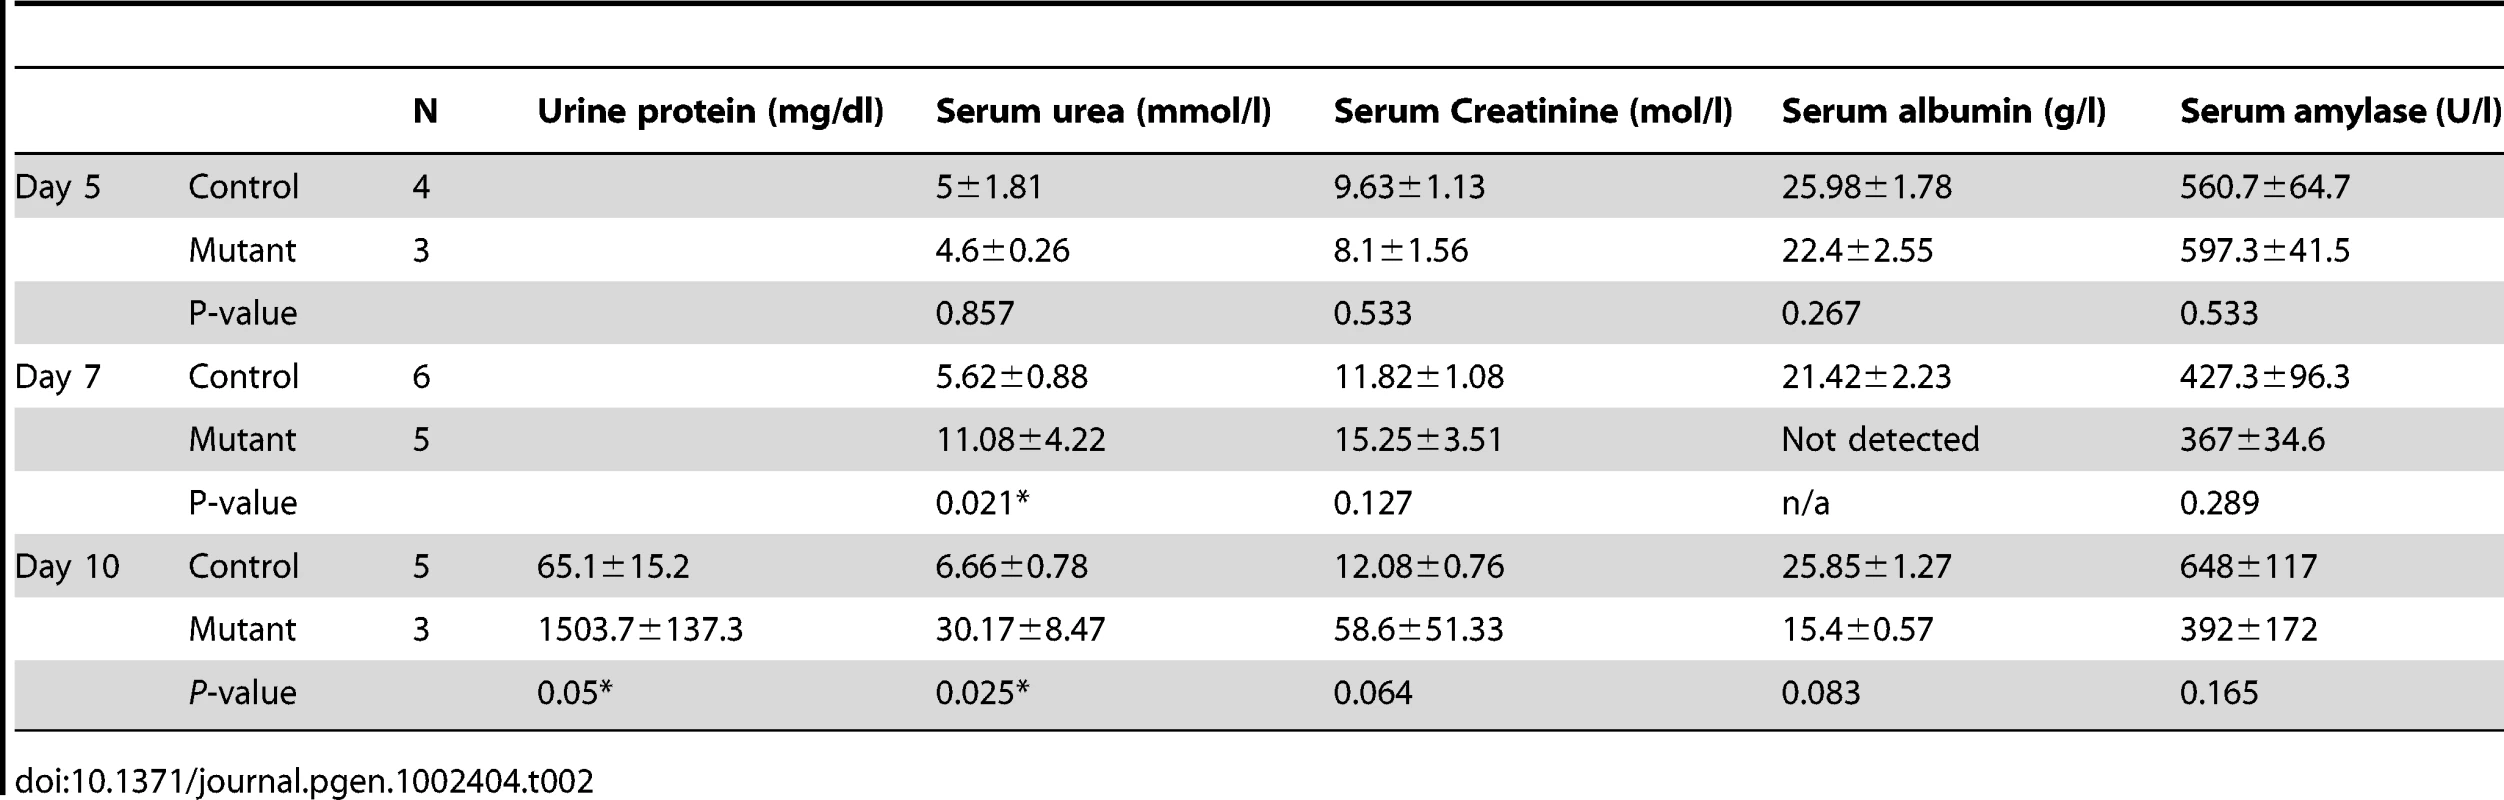 Urine and serum biochemistry analysis of adult mice deleted for Wt1.